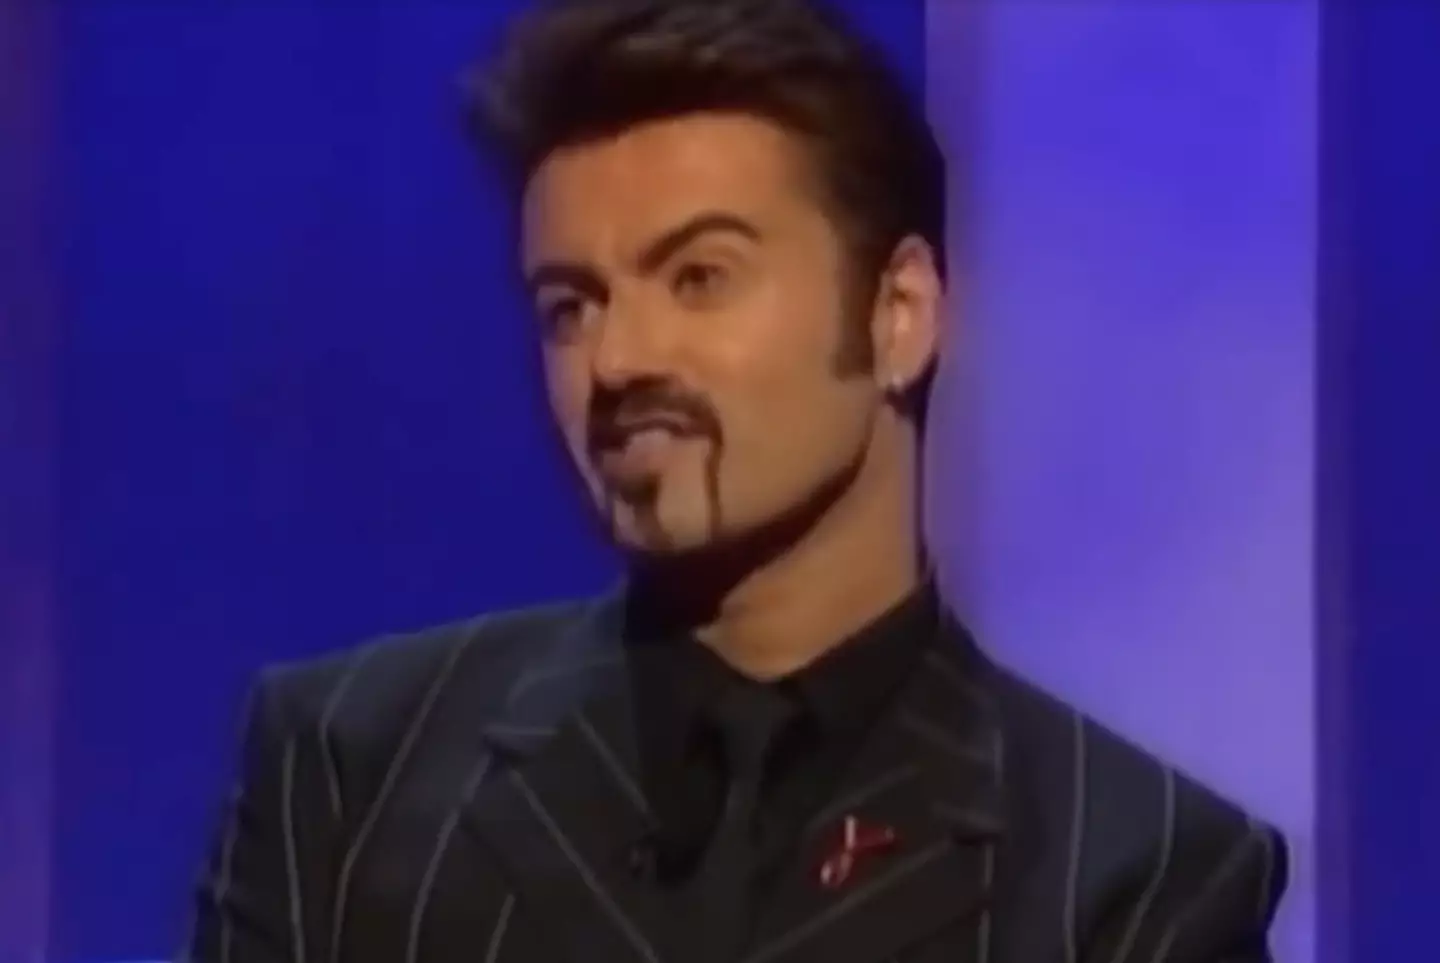 George Michael definitely made an impact during his interview with Michael Parkinson.